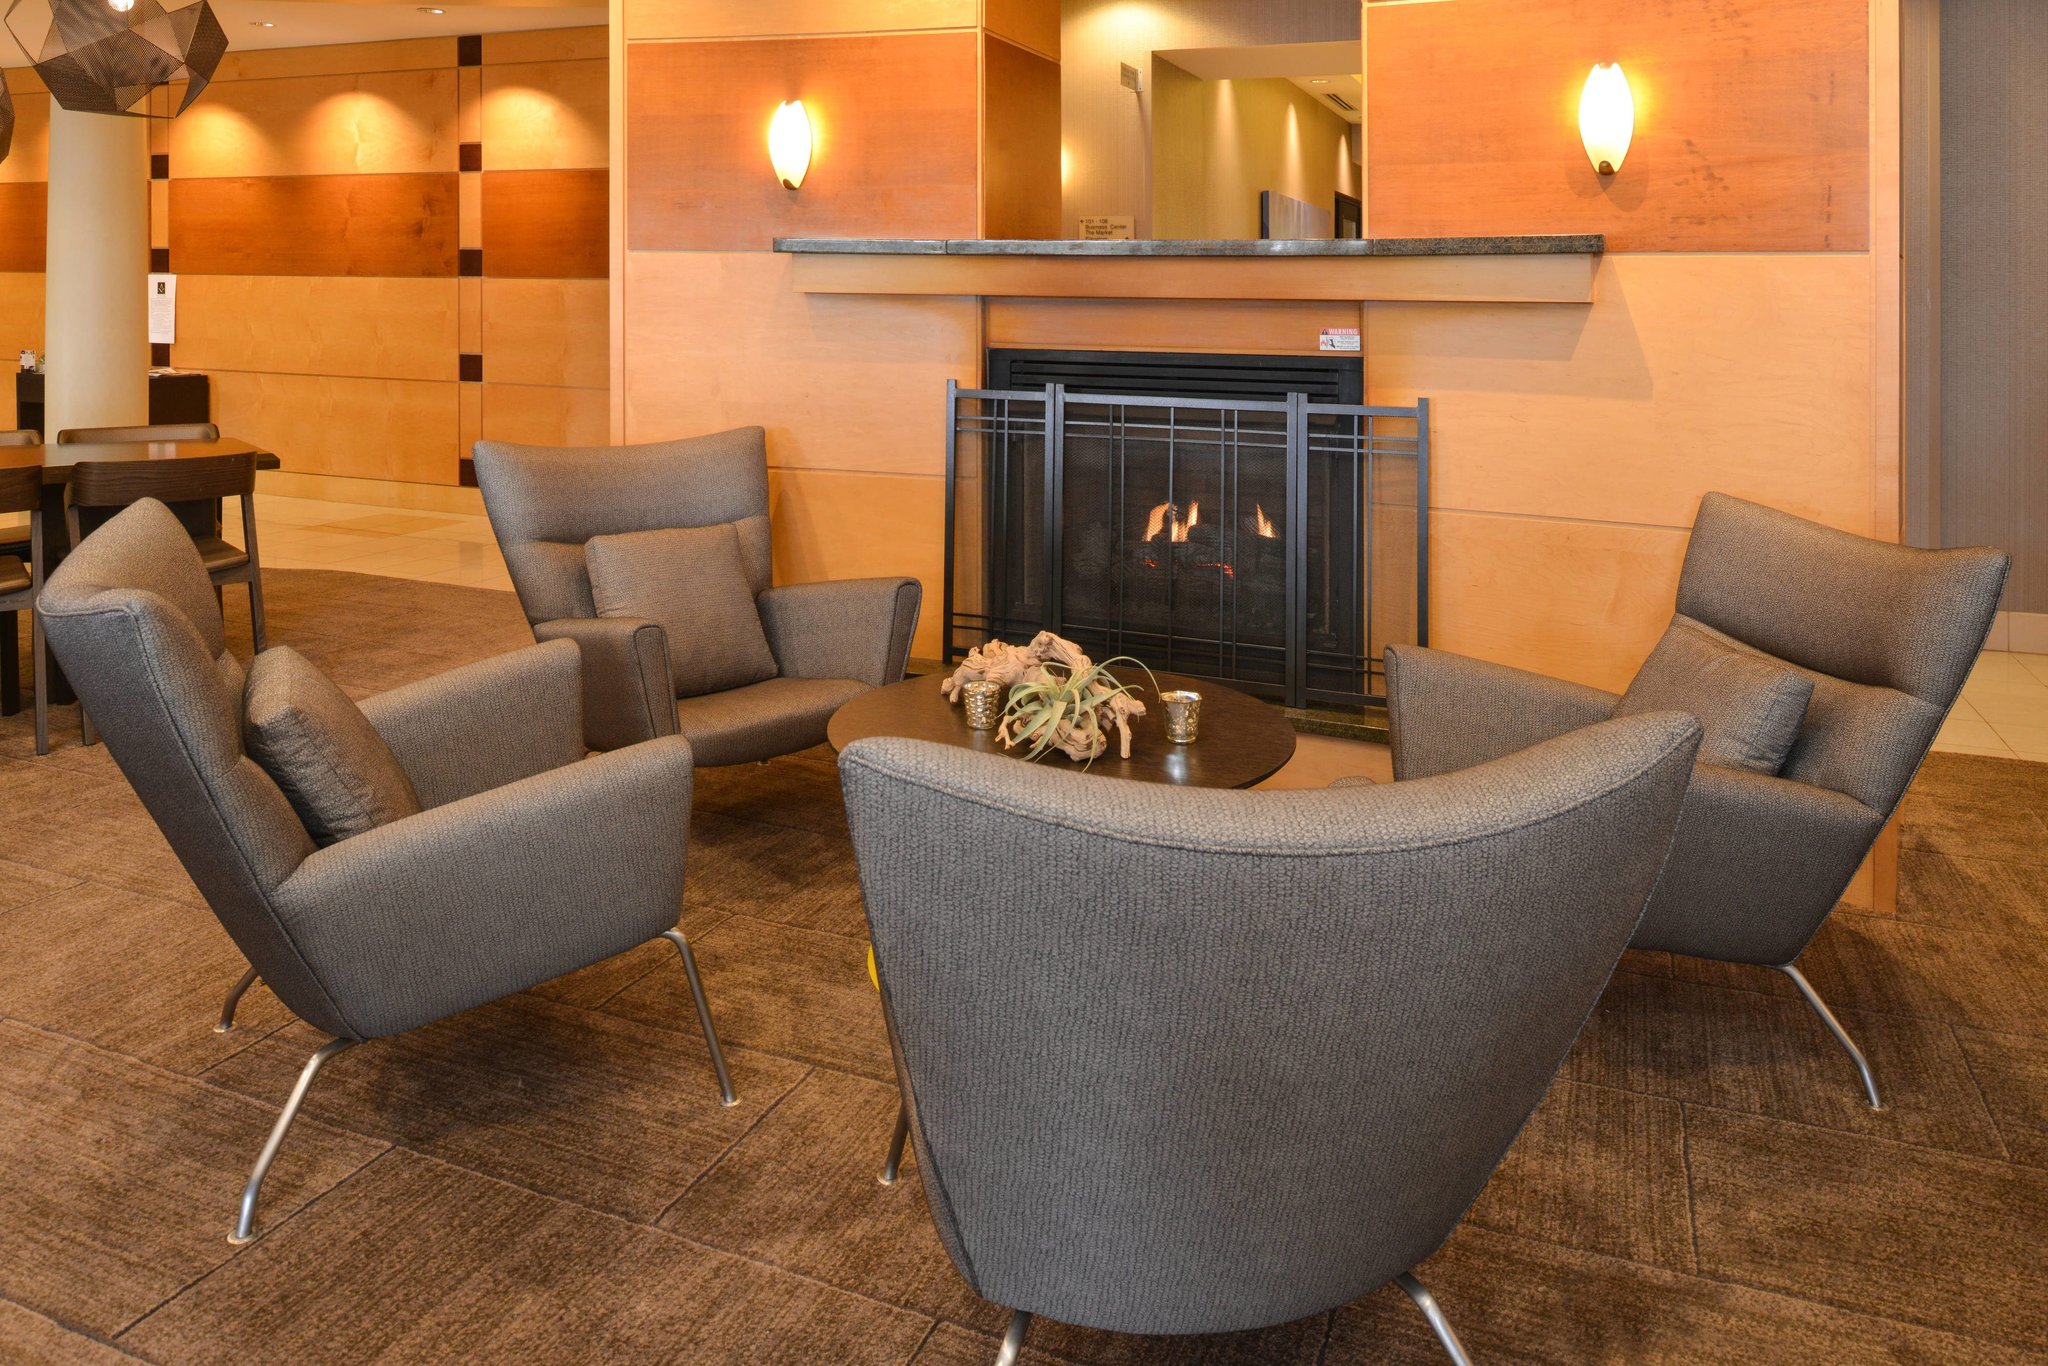 Springhill Suites Pittsburgh Mills